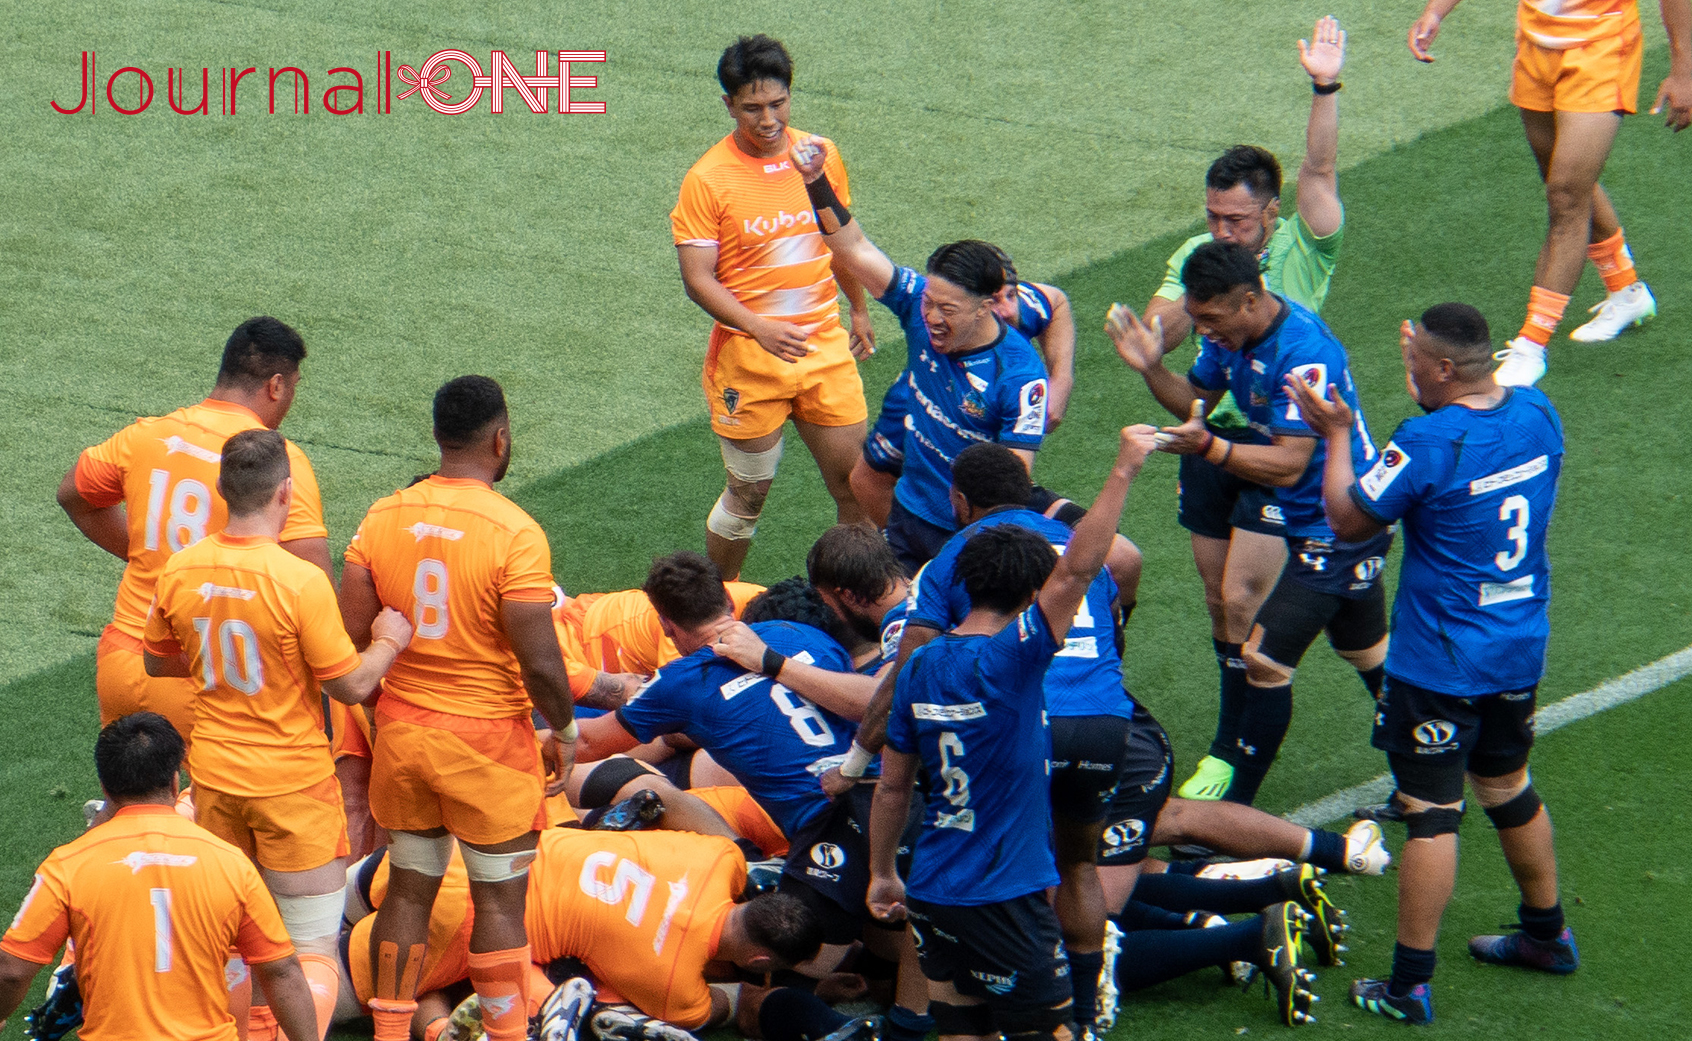 Japan Rugby League One final match, Shota Horie (Japan rugby union team) scored a try; Photo by Journal-ONE